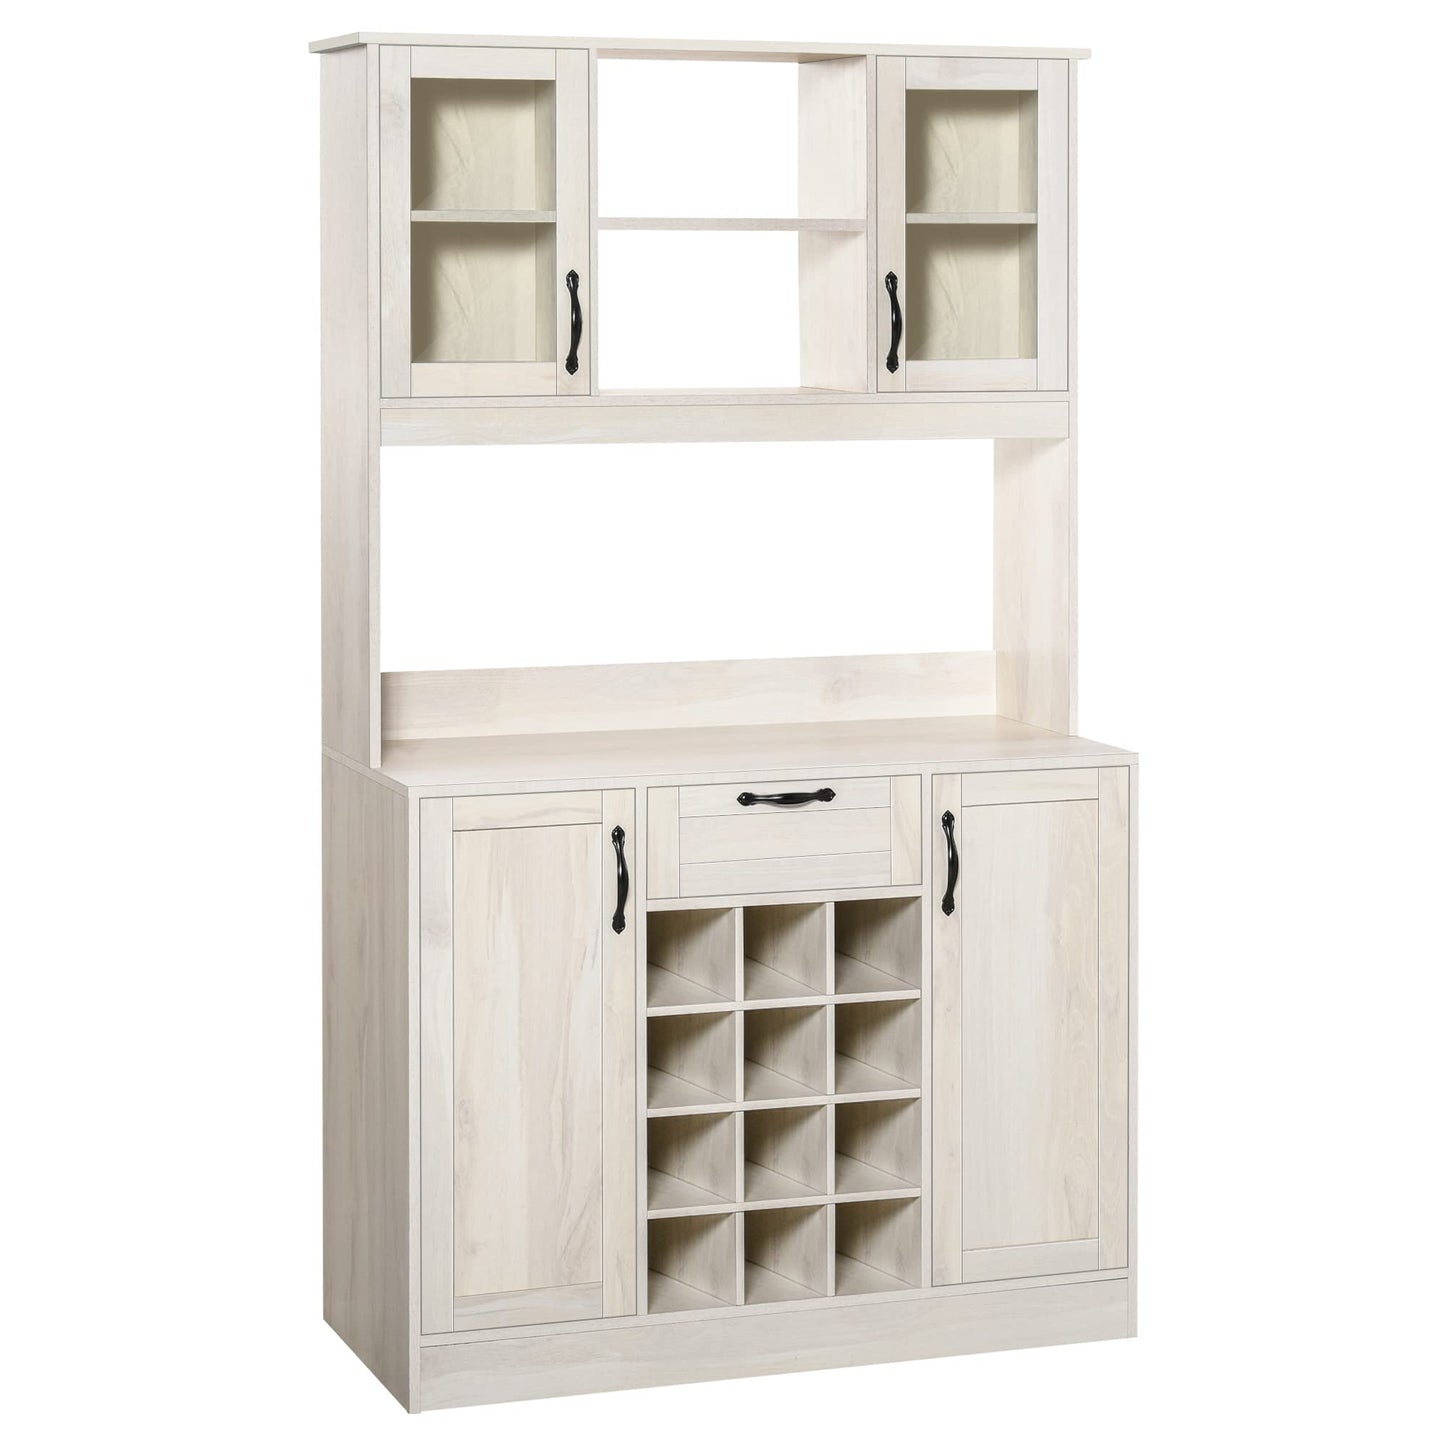 HOMCOM Kitchen Buffet with Hutch, Cupboard, Pantry with Utility Drawer, 4 Door Cabinets, and Optional 12-Bottle Wine Rack, White